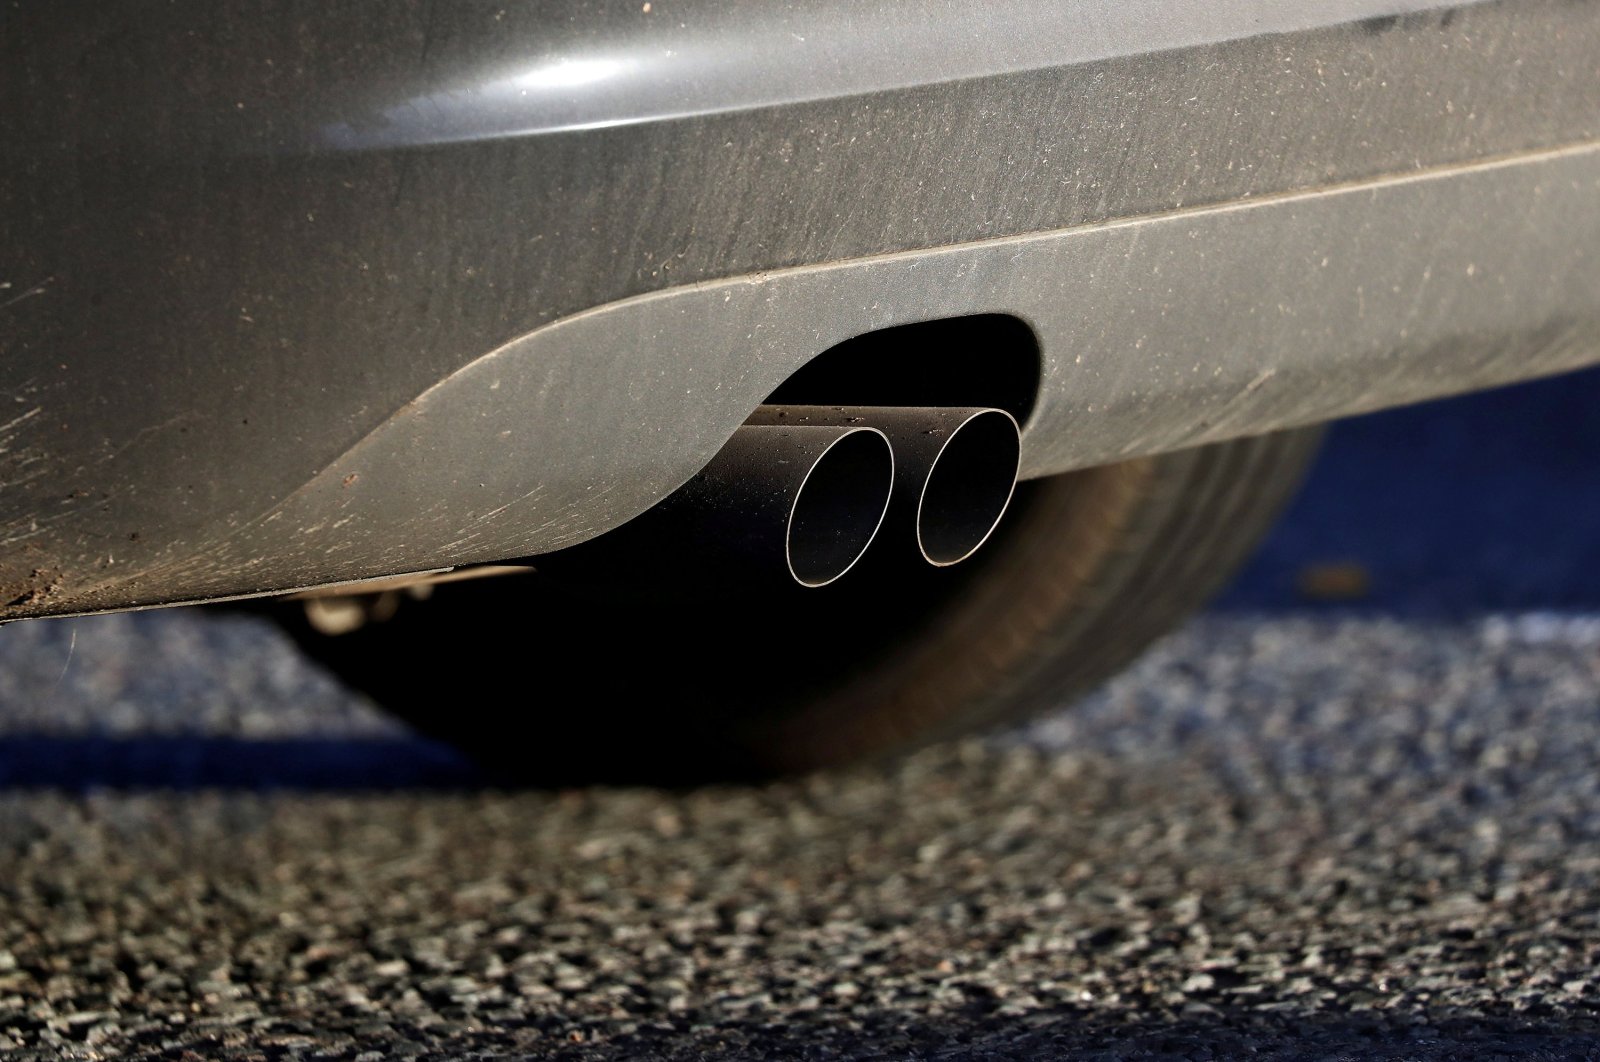 An exhaust pipe is seen as a vehicle sitting in traffic approaches the Blackwall Tunnel, in London, Britain, Nov. 18, 2020. (Reuters Photo)